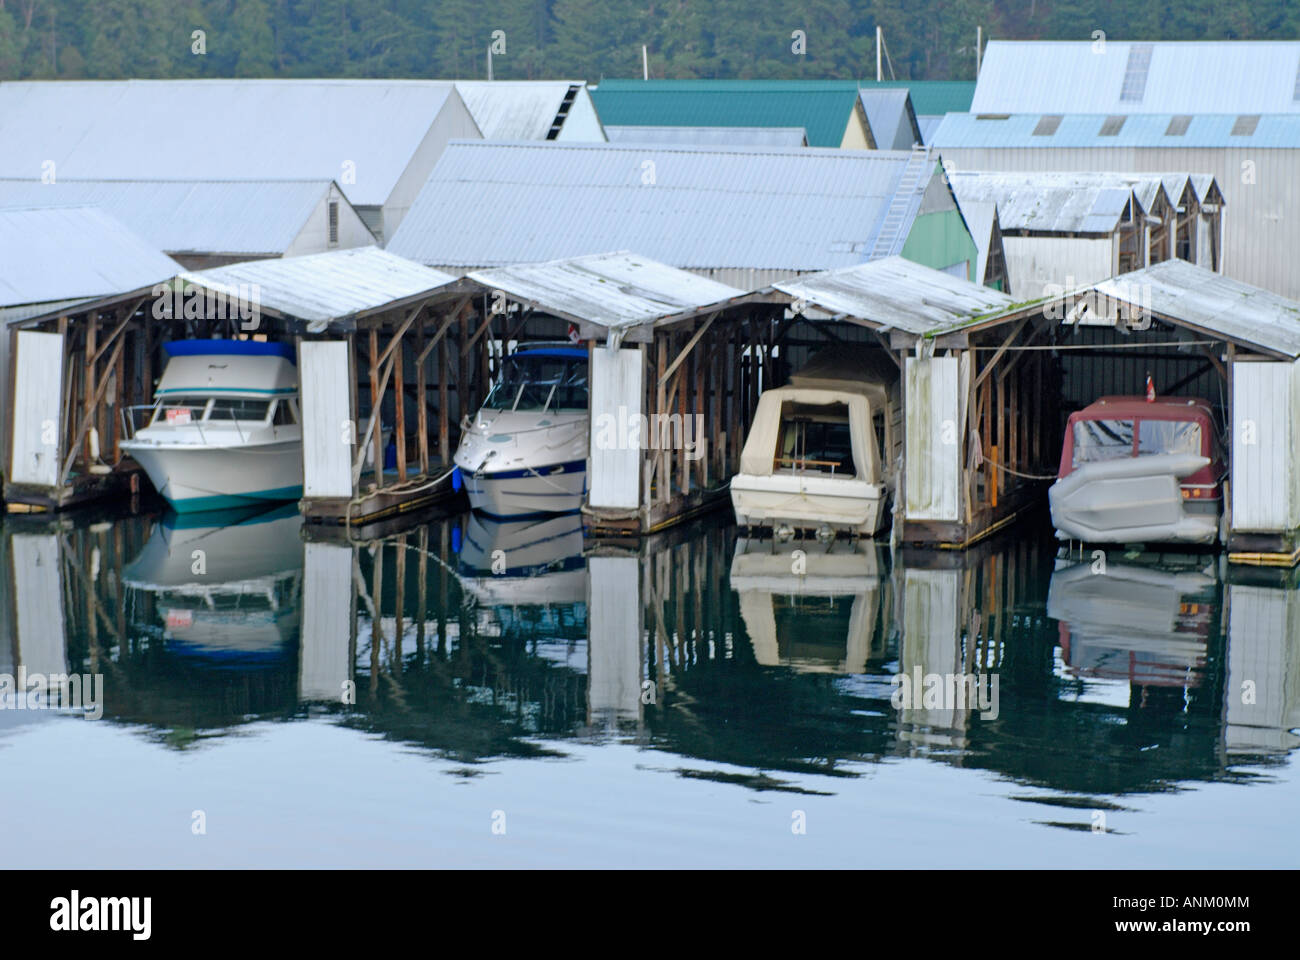 Boat Shelters at Maple Bay Duncan Vancouver Island  (Duncan), British Columbia, Canada Stock Photo